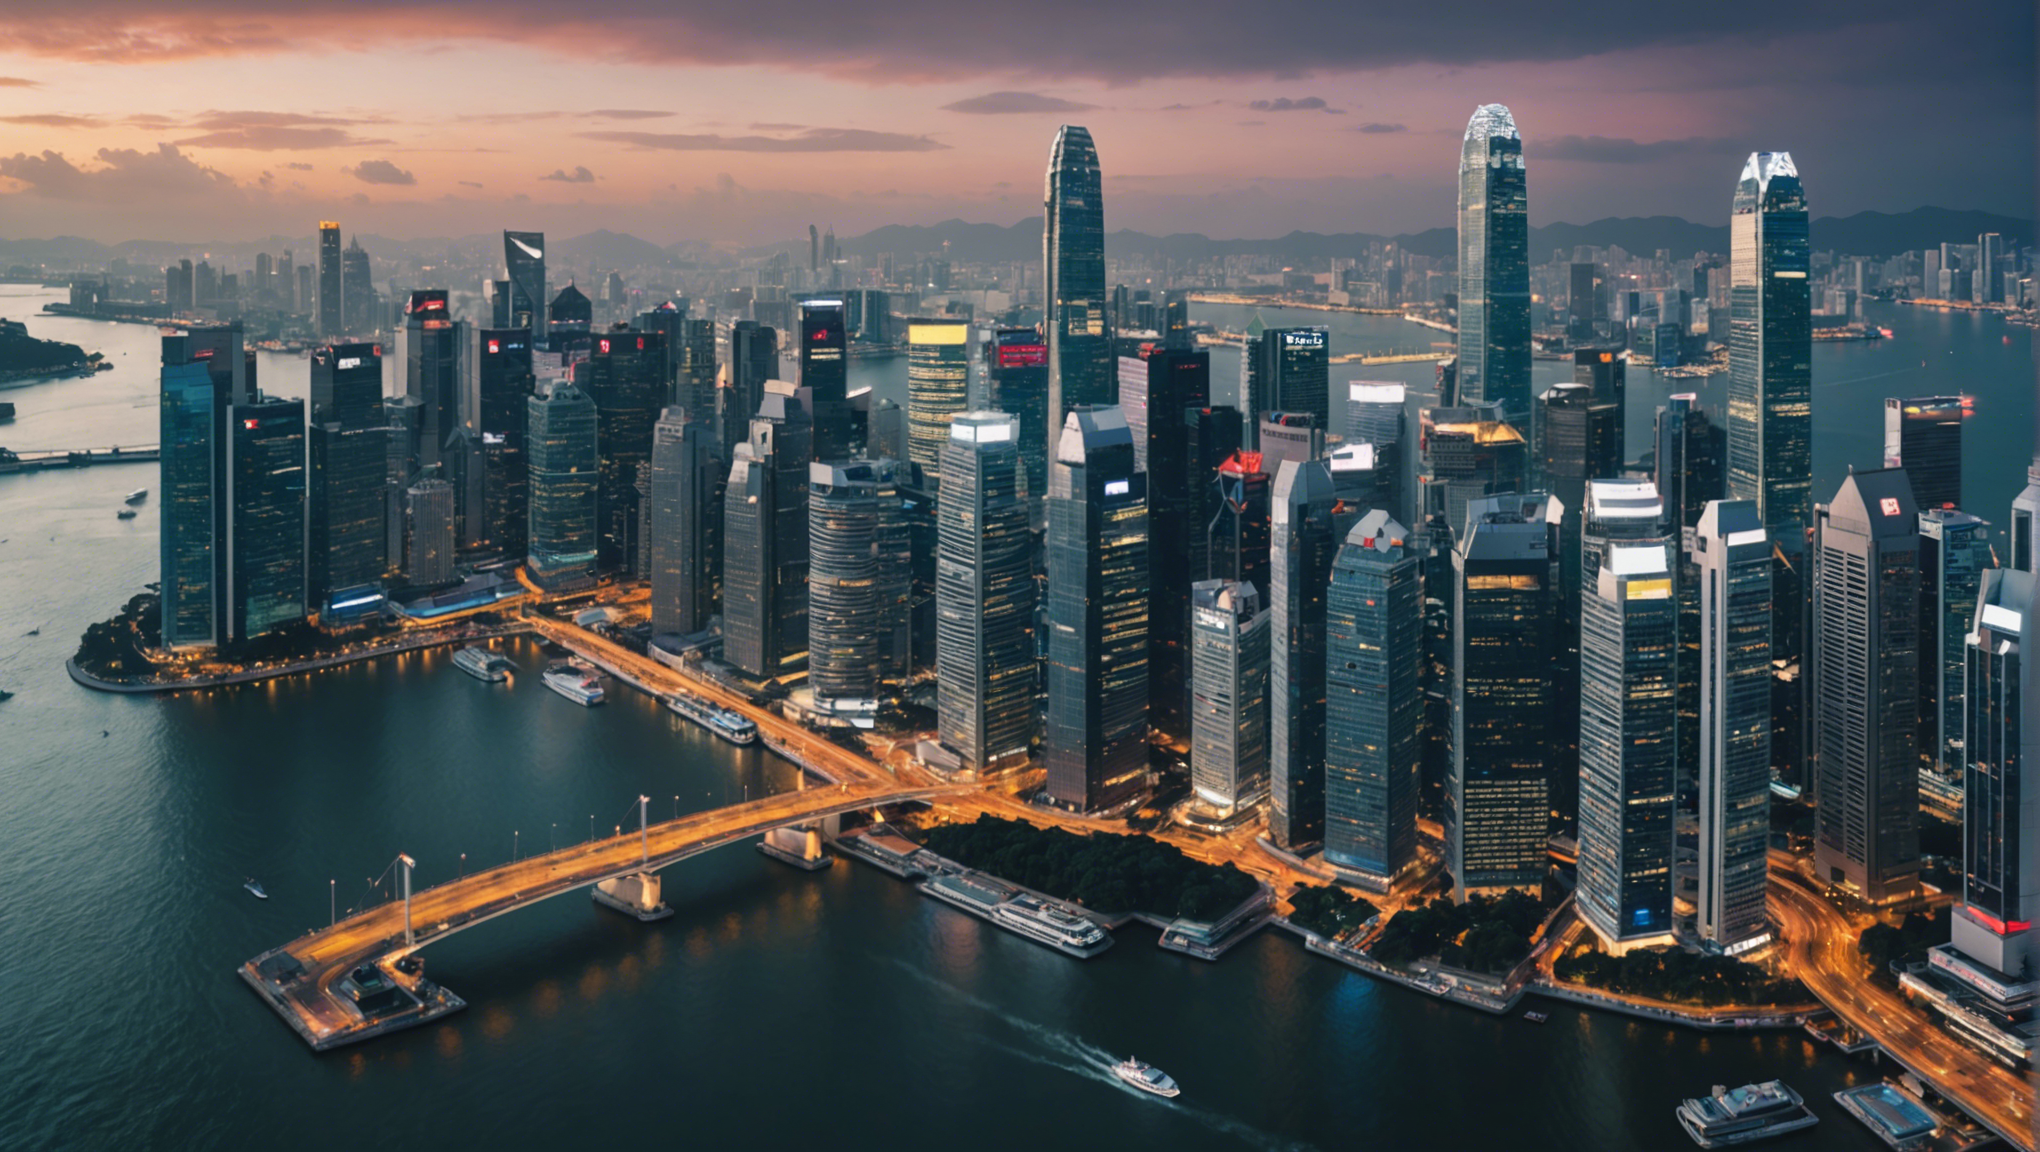 discover how singapore and hong kong are collaborating to tackle fraudulent practices in the fintech sector. learn more today!